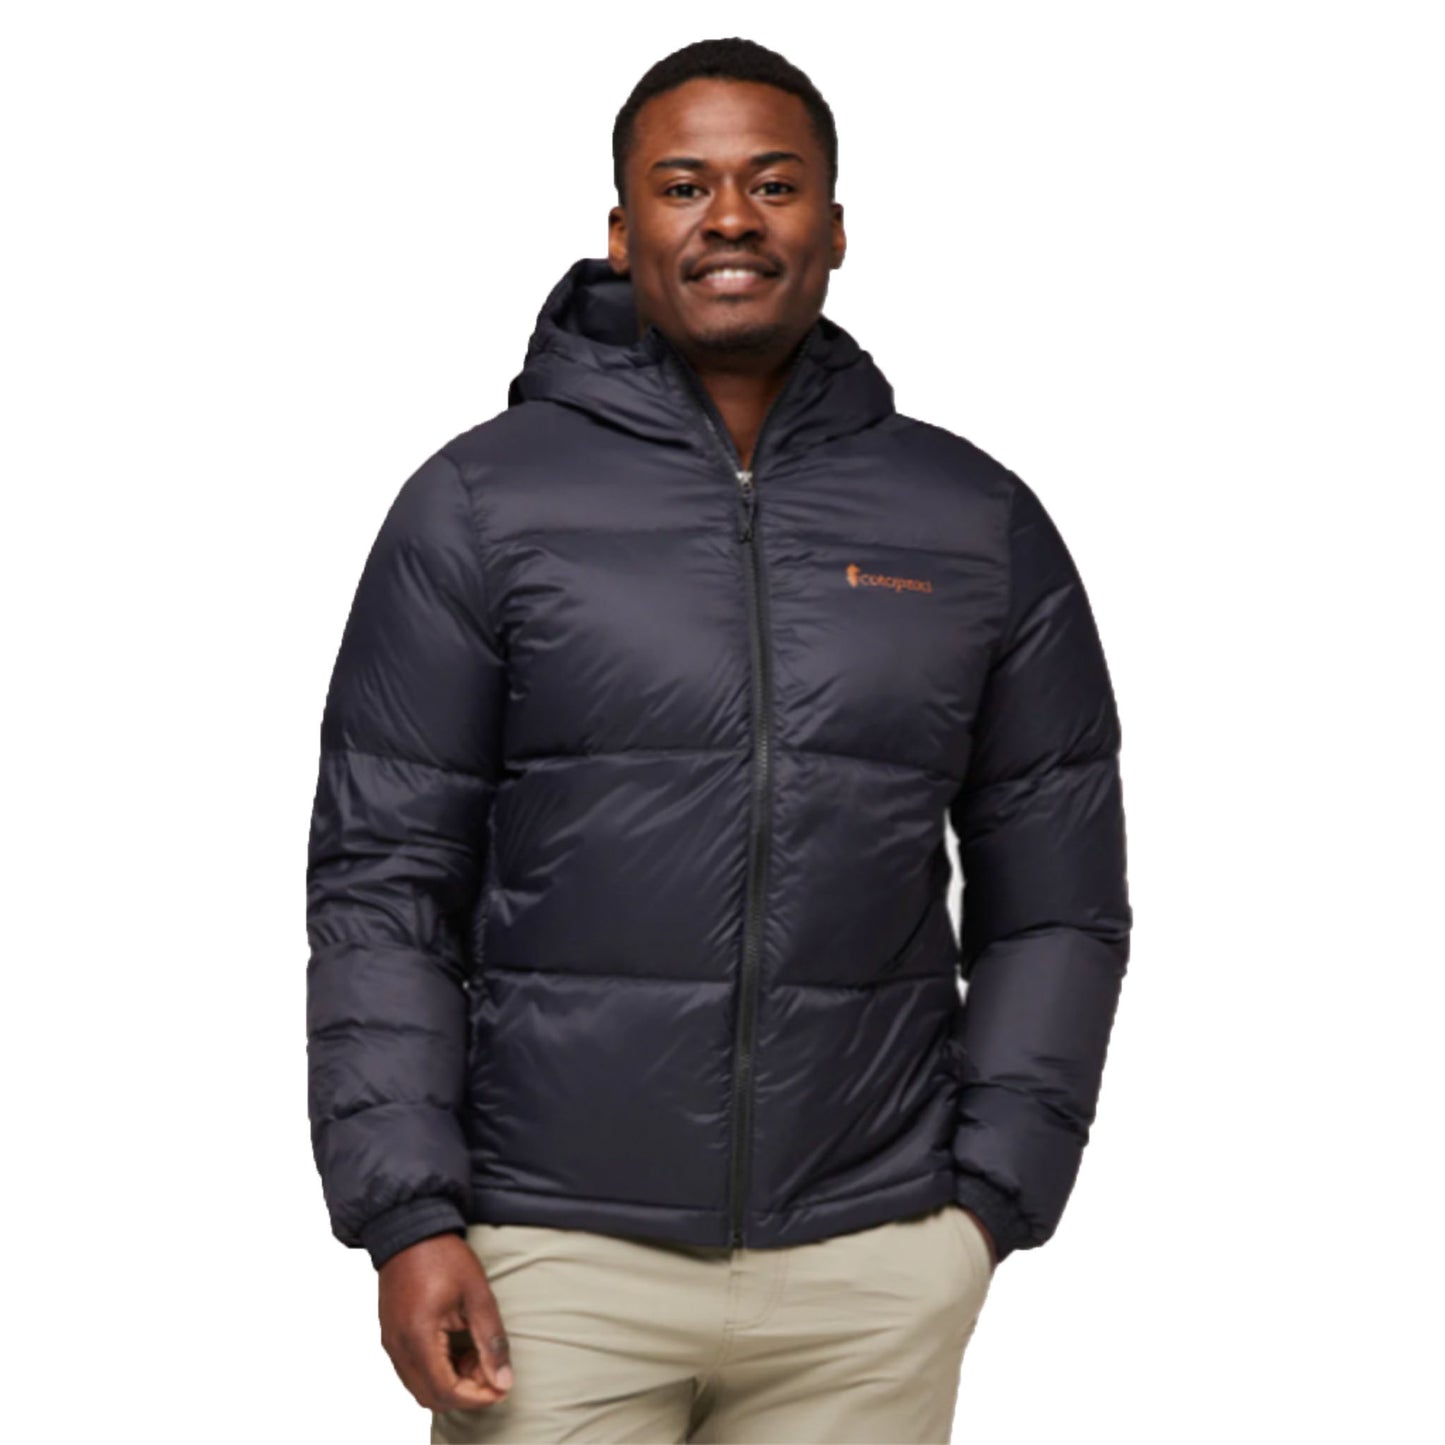 Cotopaxi Men's Solazo Down Hooded Jacket in Black